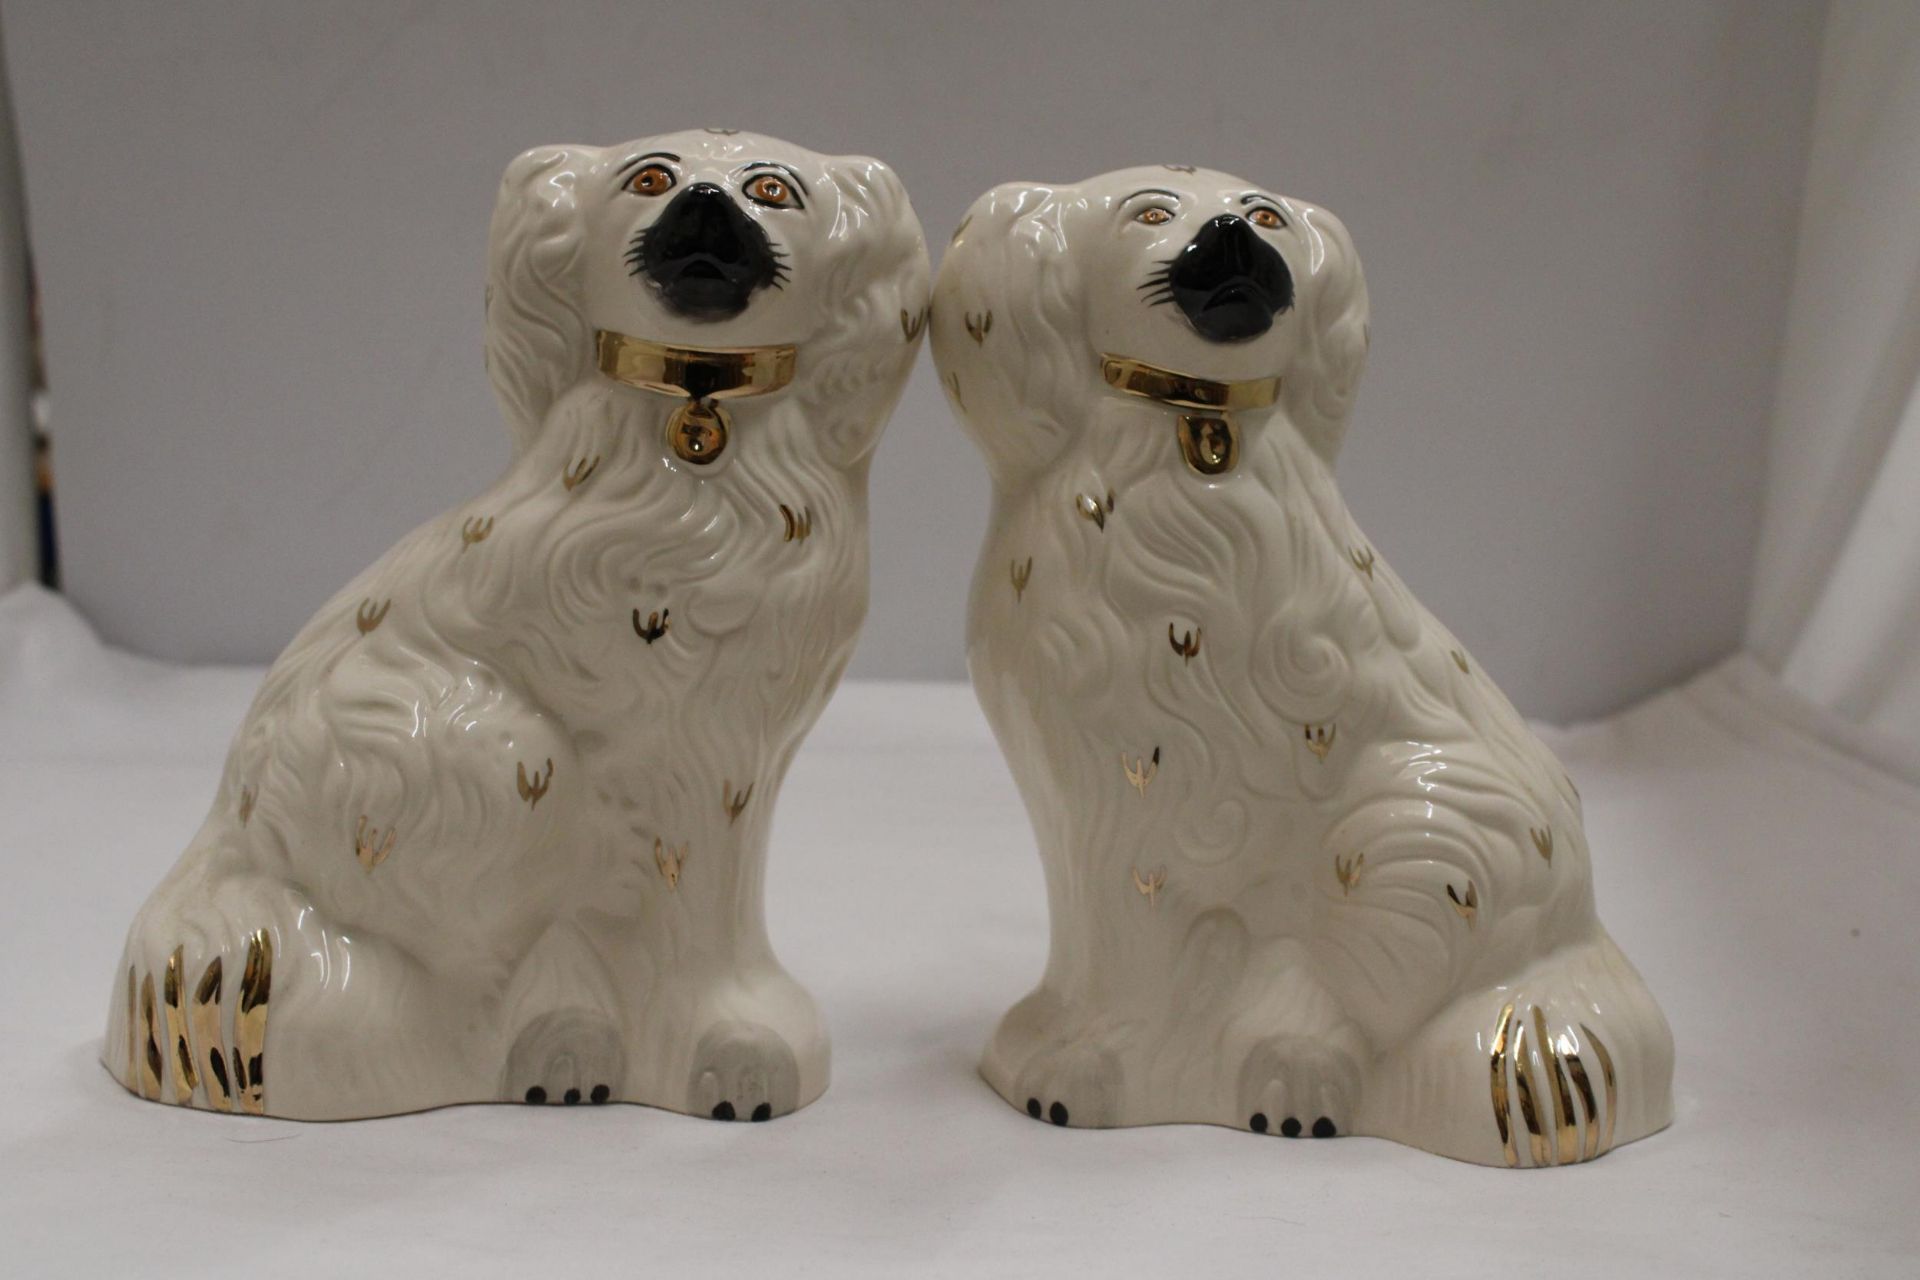 A LARGE SIZED PAIR OF ROYAL DOULTON SPANIEL DOGS IN ORIGINAL BOX - Image 2 of 6